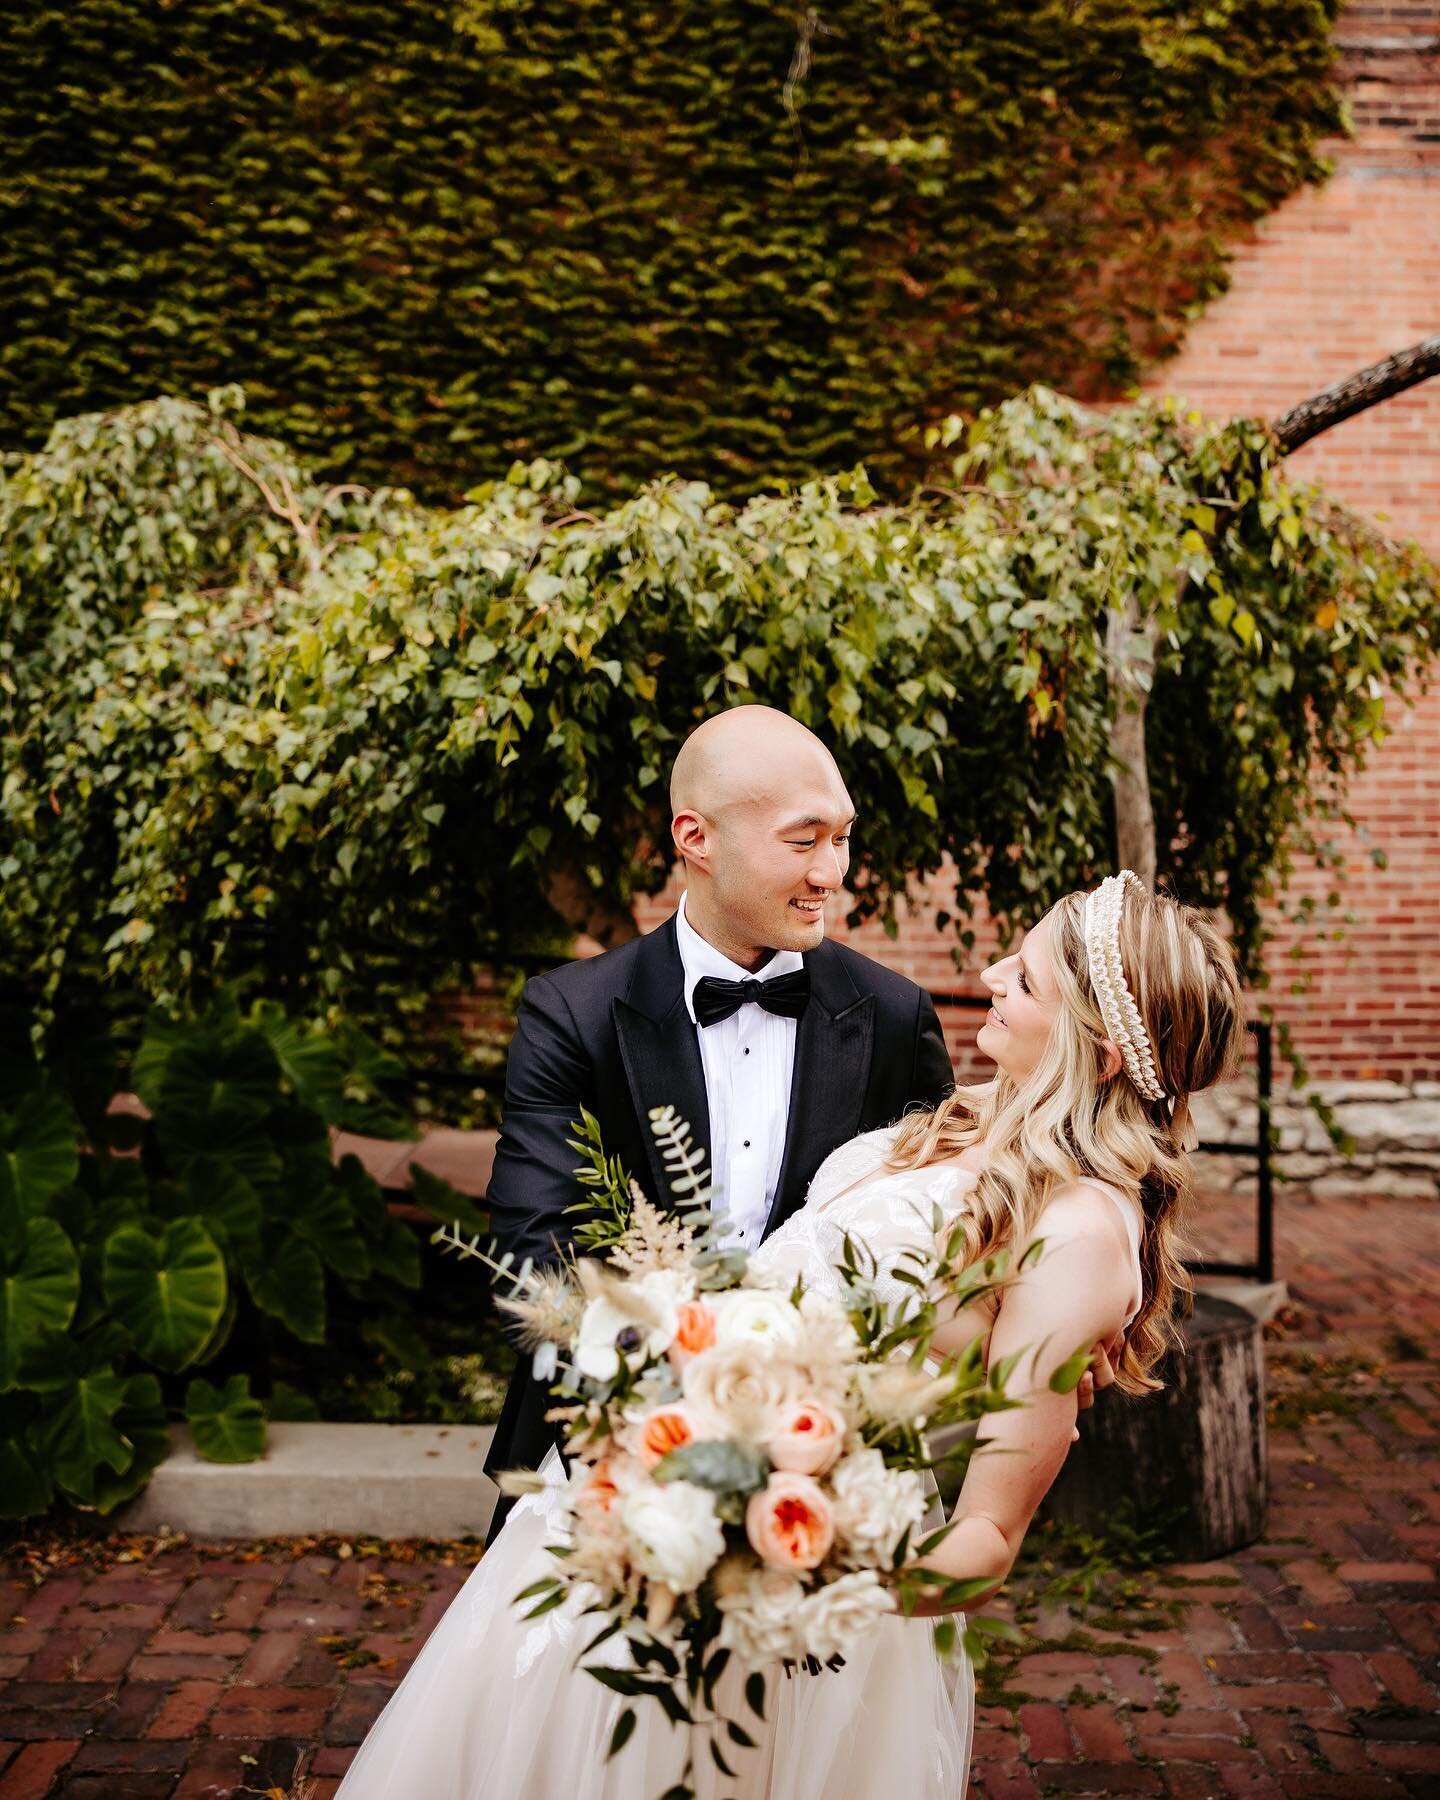 Some *very* warranted mutual gazing happening in our lush green courtyard last summer 🌿💚
#firstlook
photo | @amberkoellingphotography